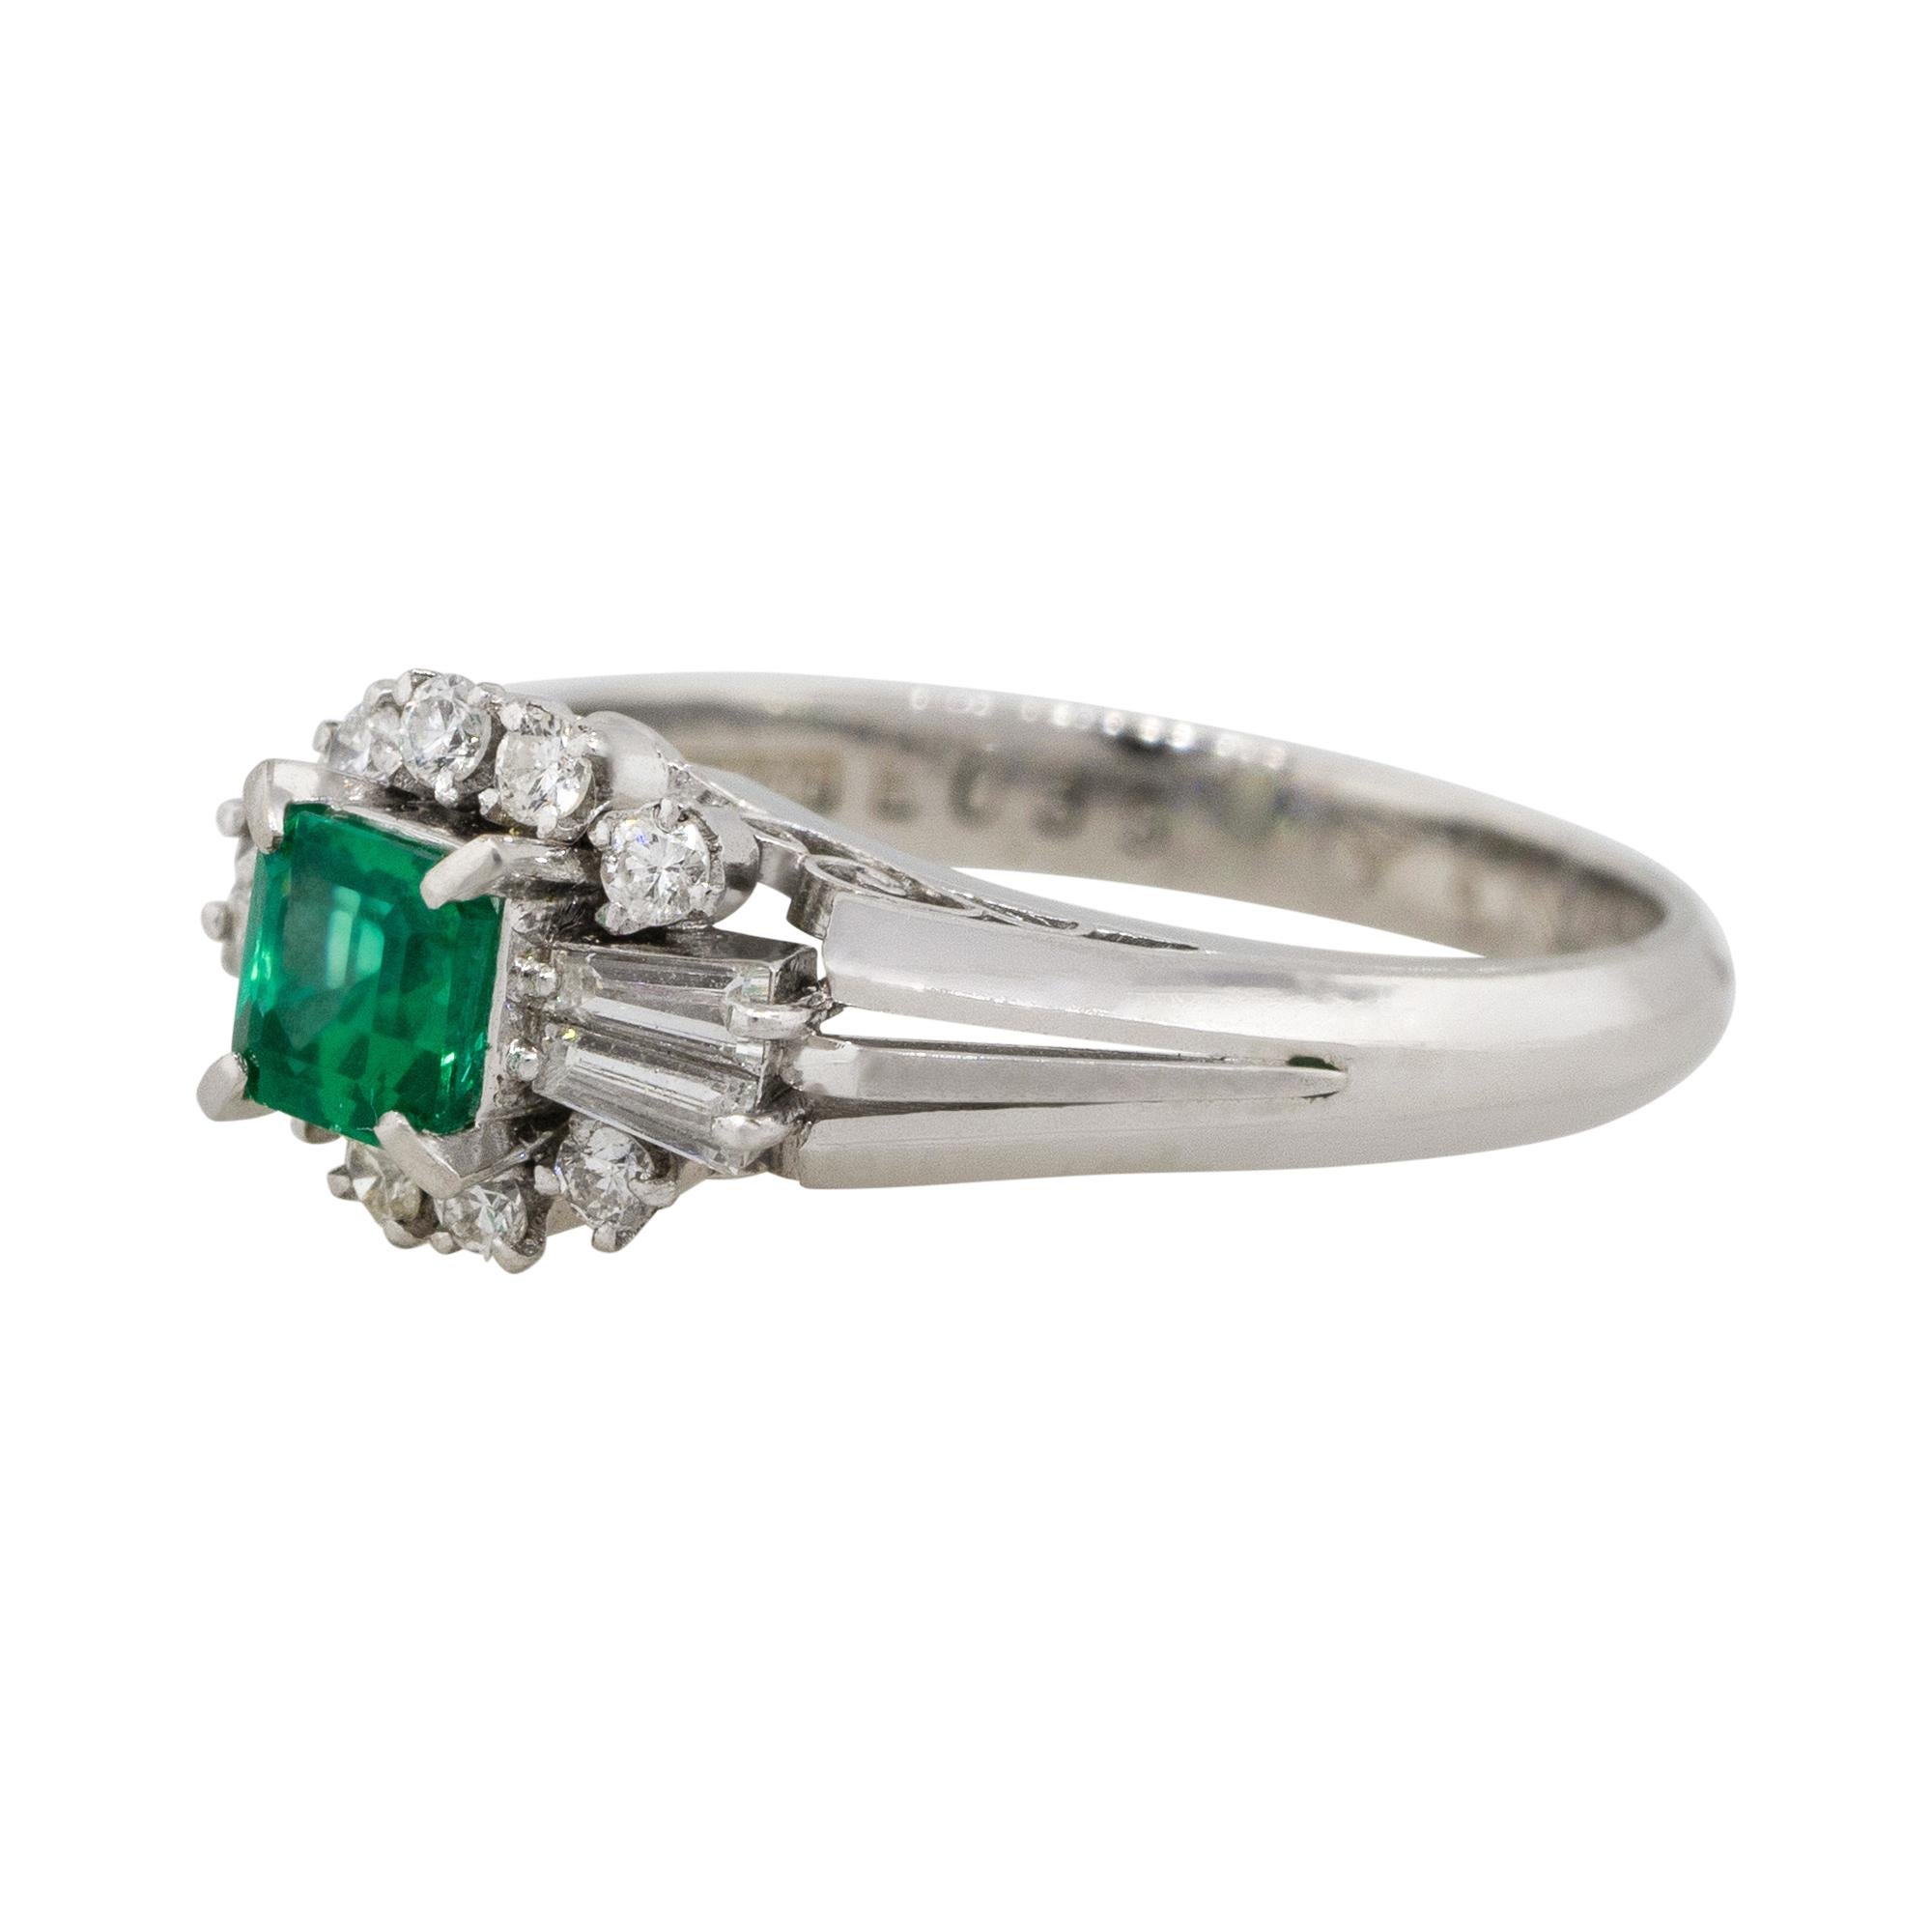 Material: Platinum
Gemstone details: Approx. 0.39ctw Emerald center gemstone
Diamond details: Approx. 0.27ctw of round and baguette cut Diamonds. Diamonds are G/H in color and VS in clarity
Ring Size: 4.5
Ring Measurements: 0.75